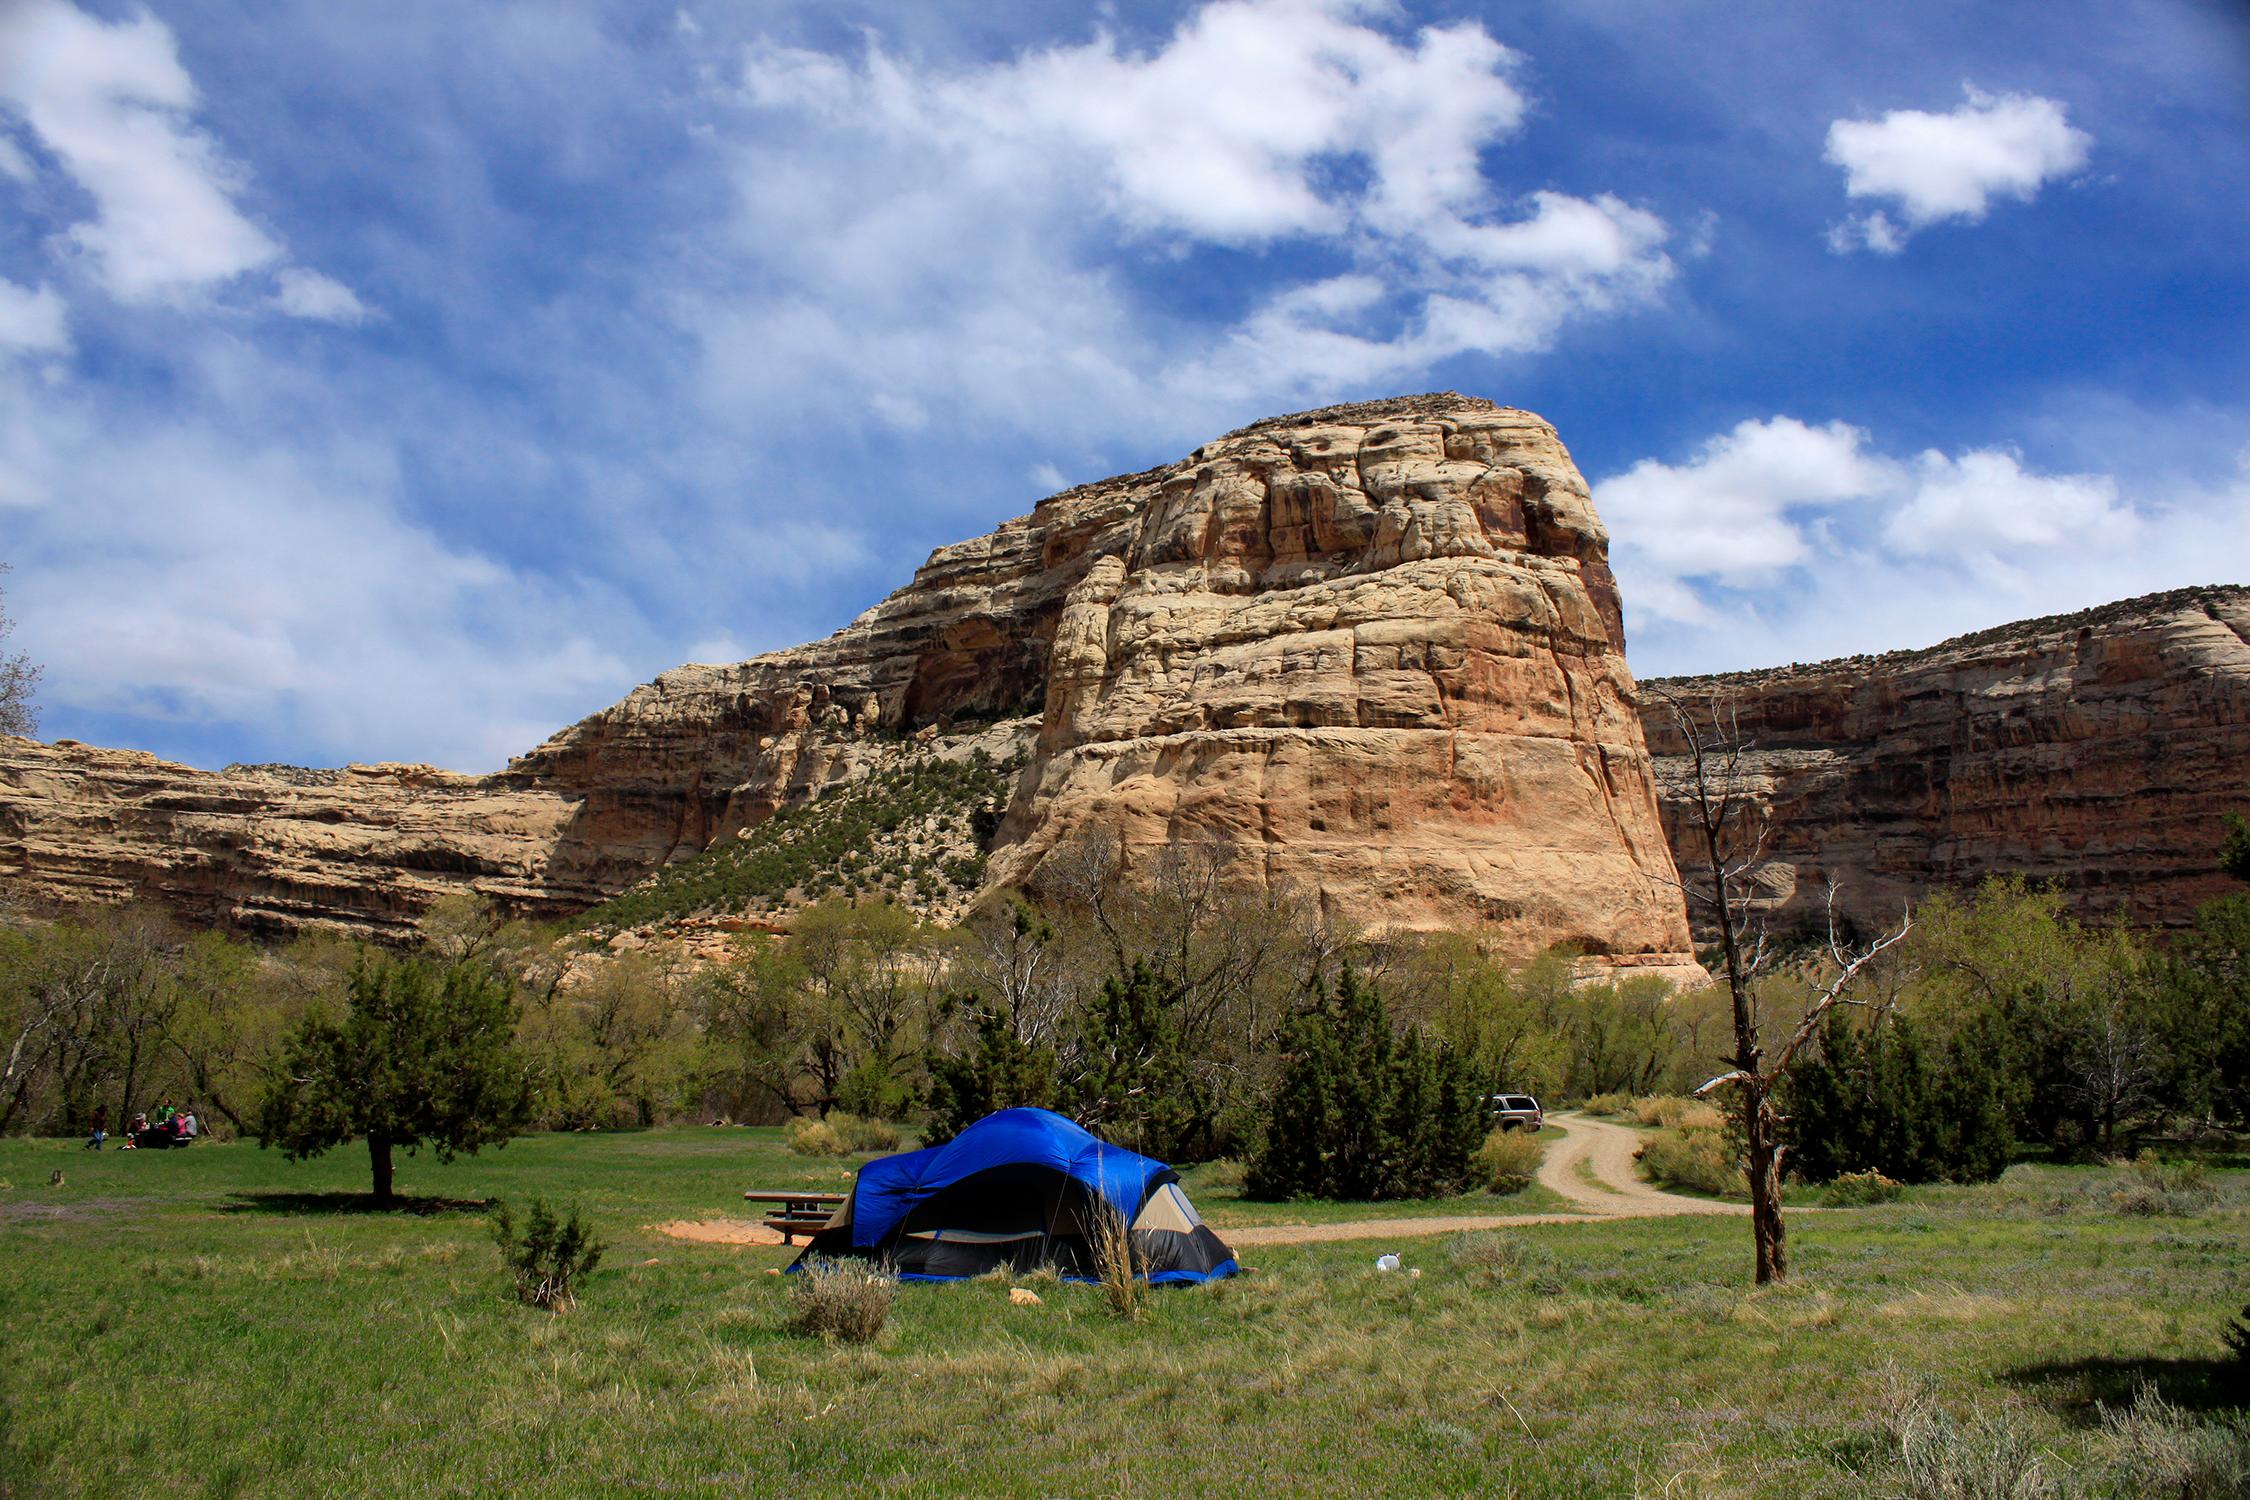 A blue tent sits in an open field with a pinnacle of rock in the background